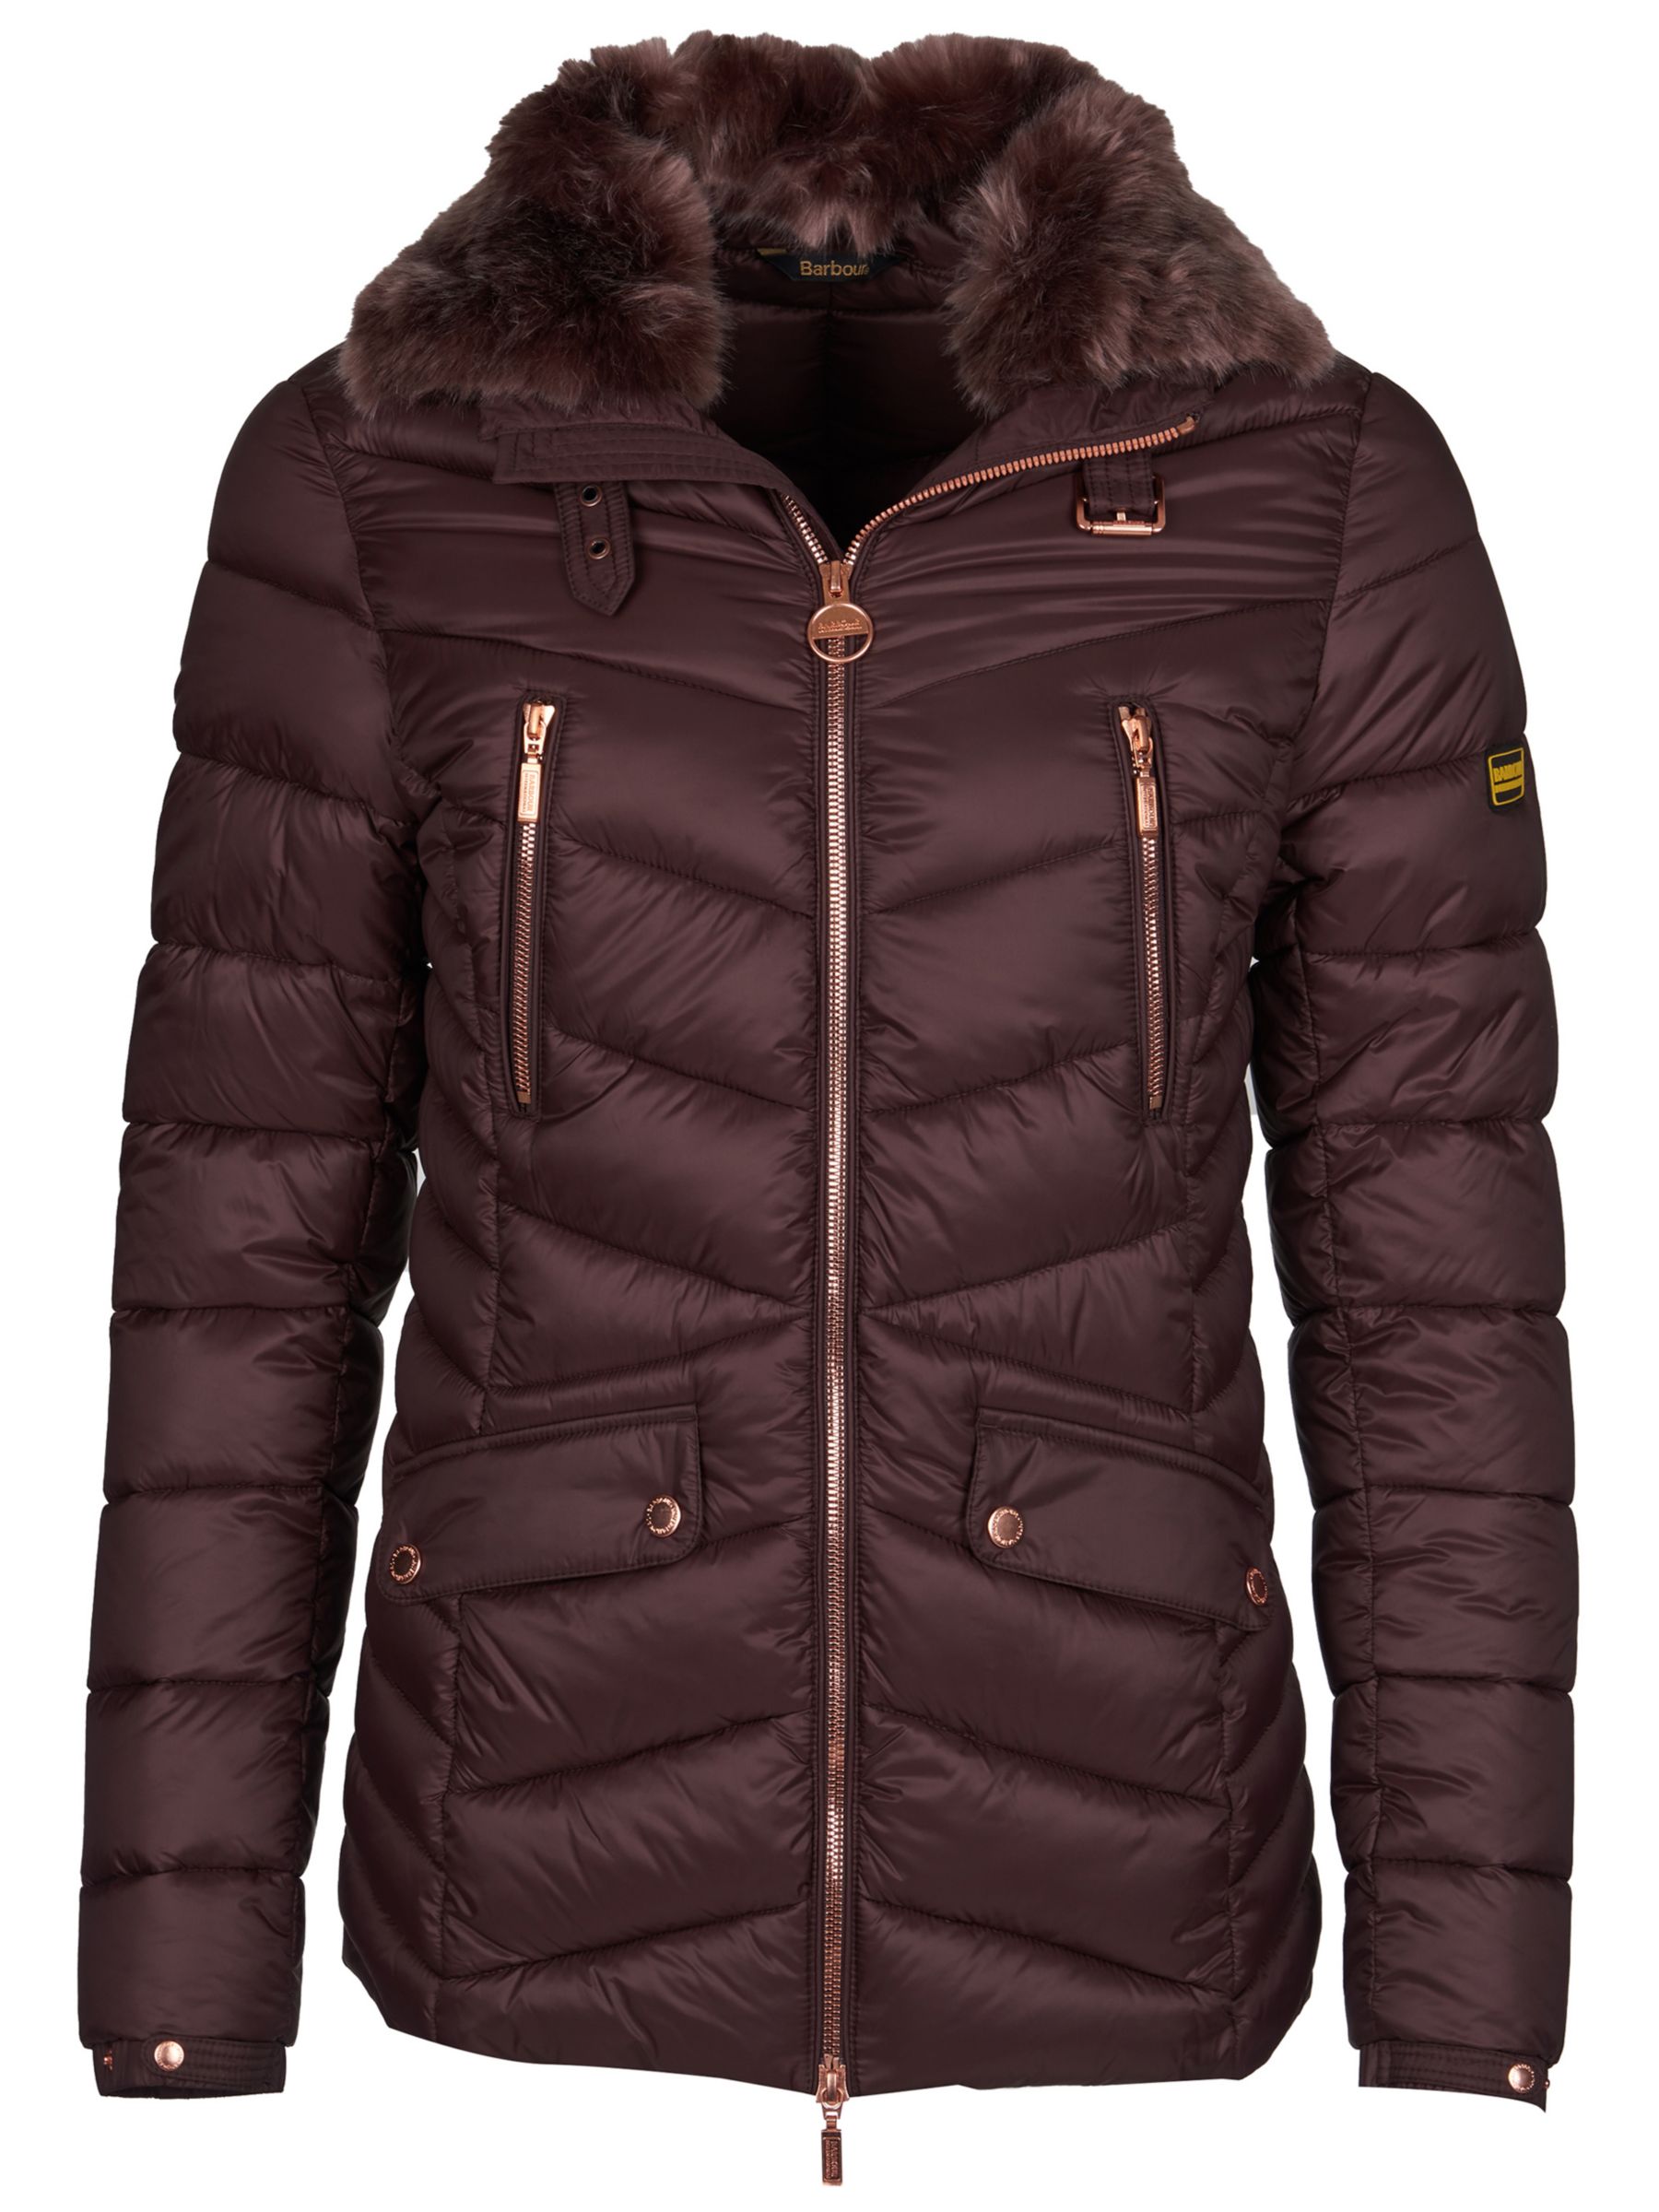 barbour international valencia quilted womens jacket